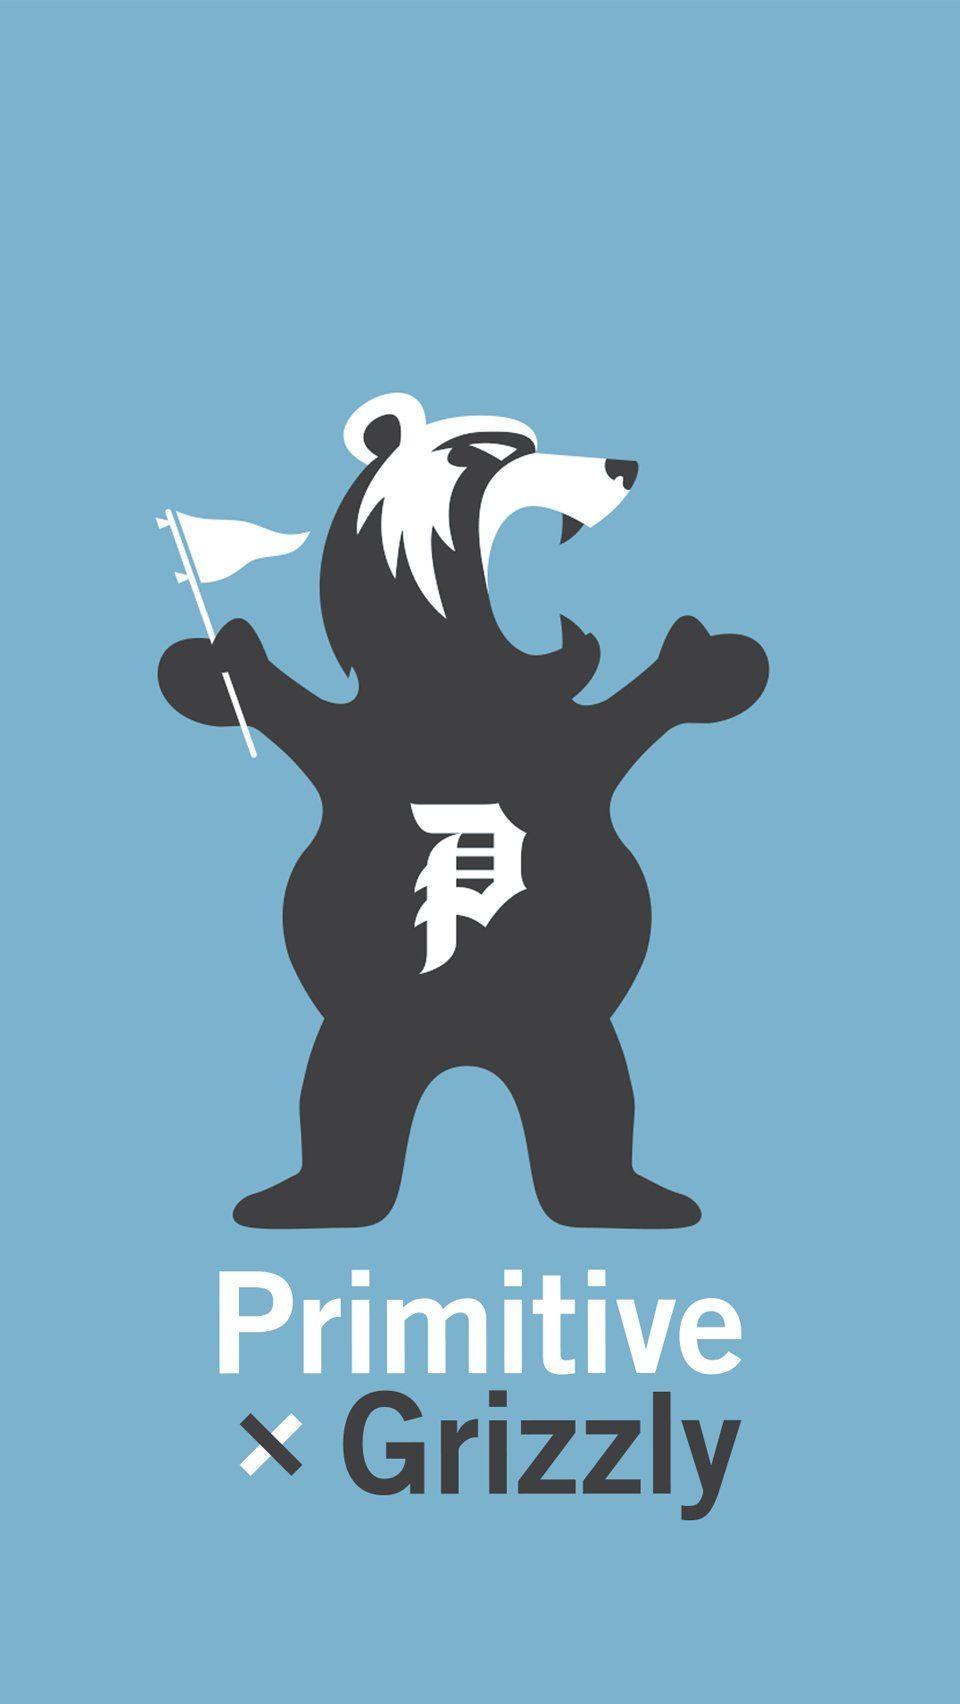 Primitive Grizzly Diamond Logo - LiftedMiles 1st - Grizzly Grip Tape Primitive Wallpaper - XISTmade ...